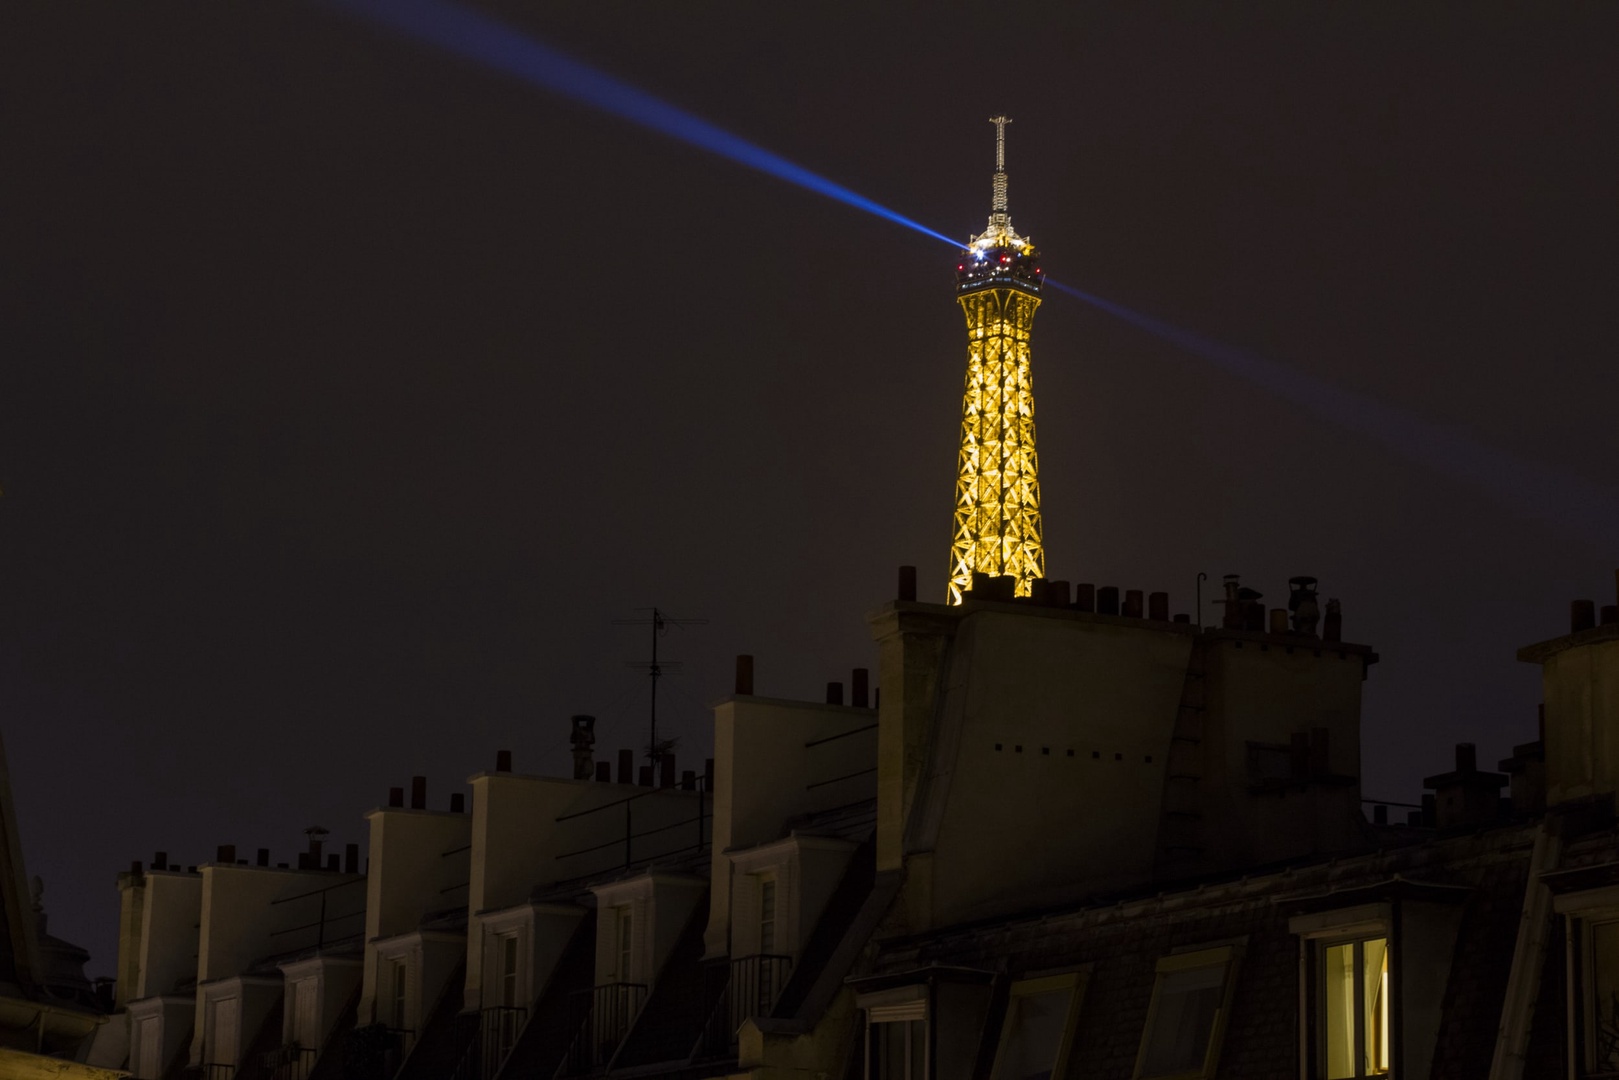 The apartment offers magical views of the Eiffel Tower in the evening.